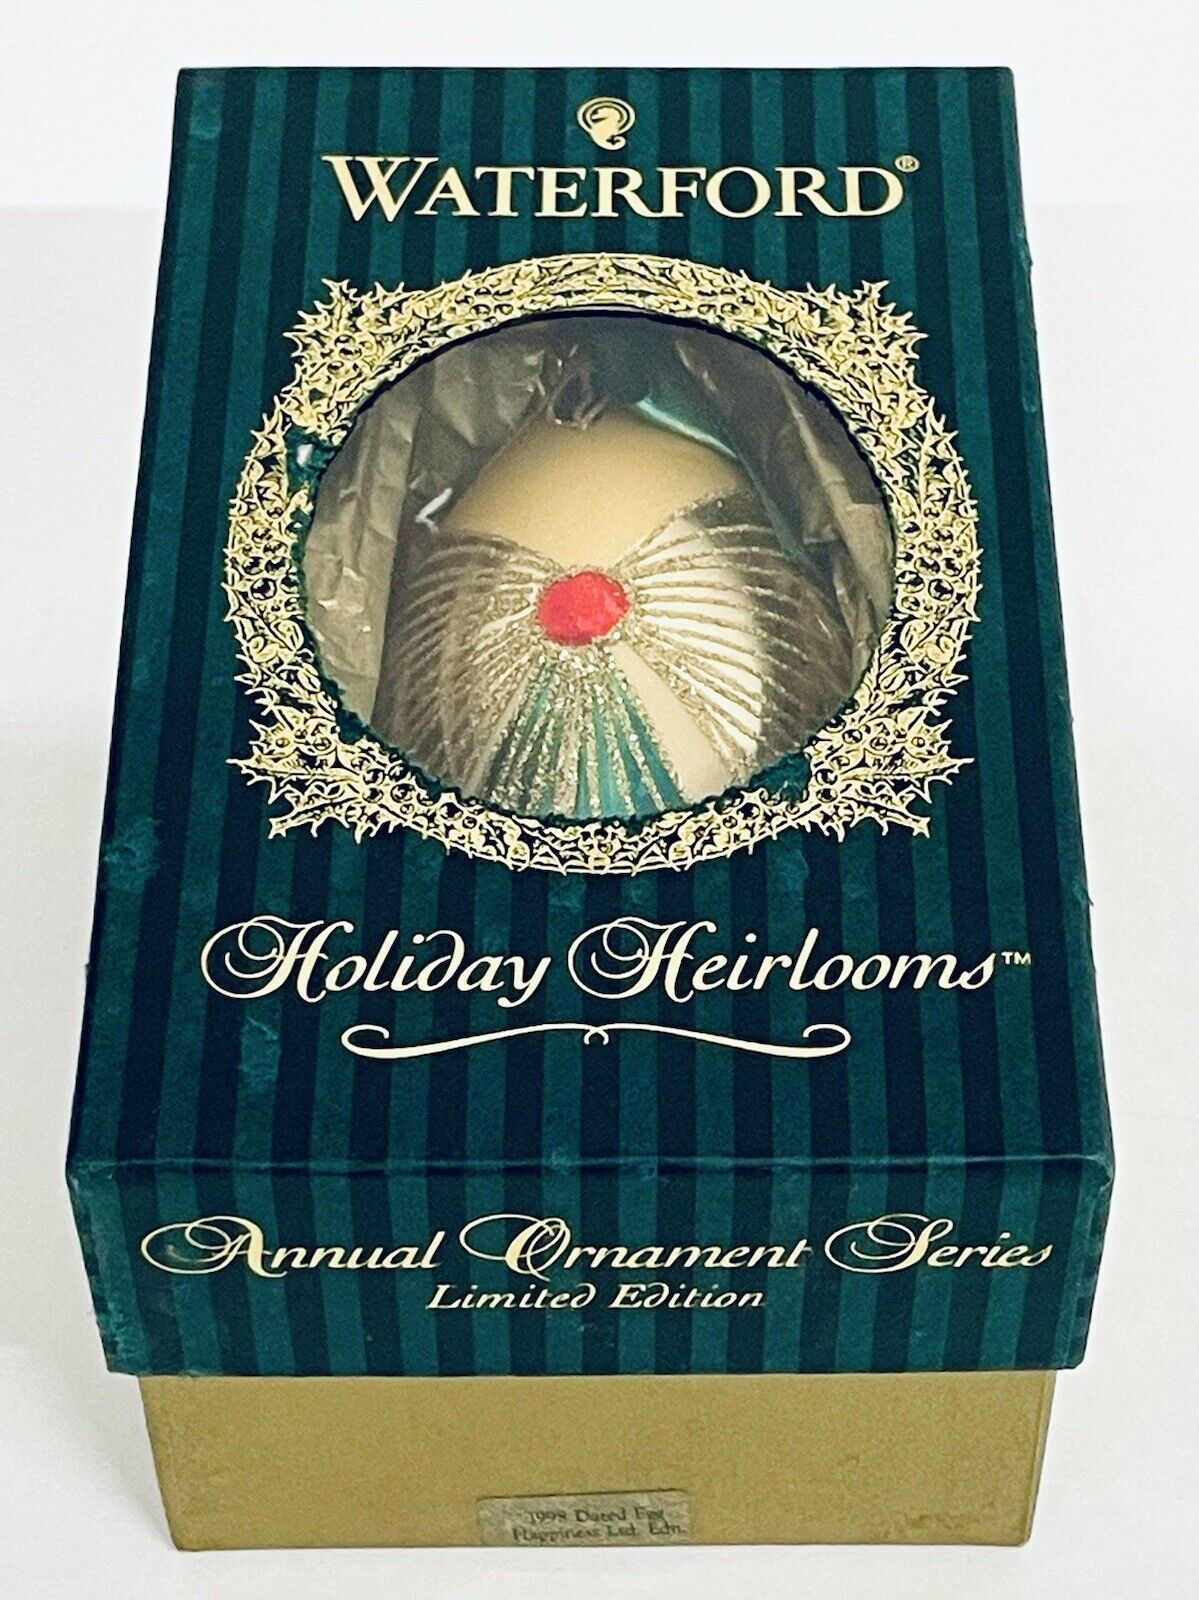 Fabulous Vintage 1998 Waterford Holliday Heirlooms Limited Edition Ornaments